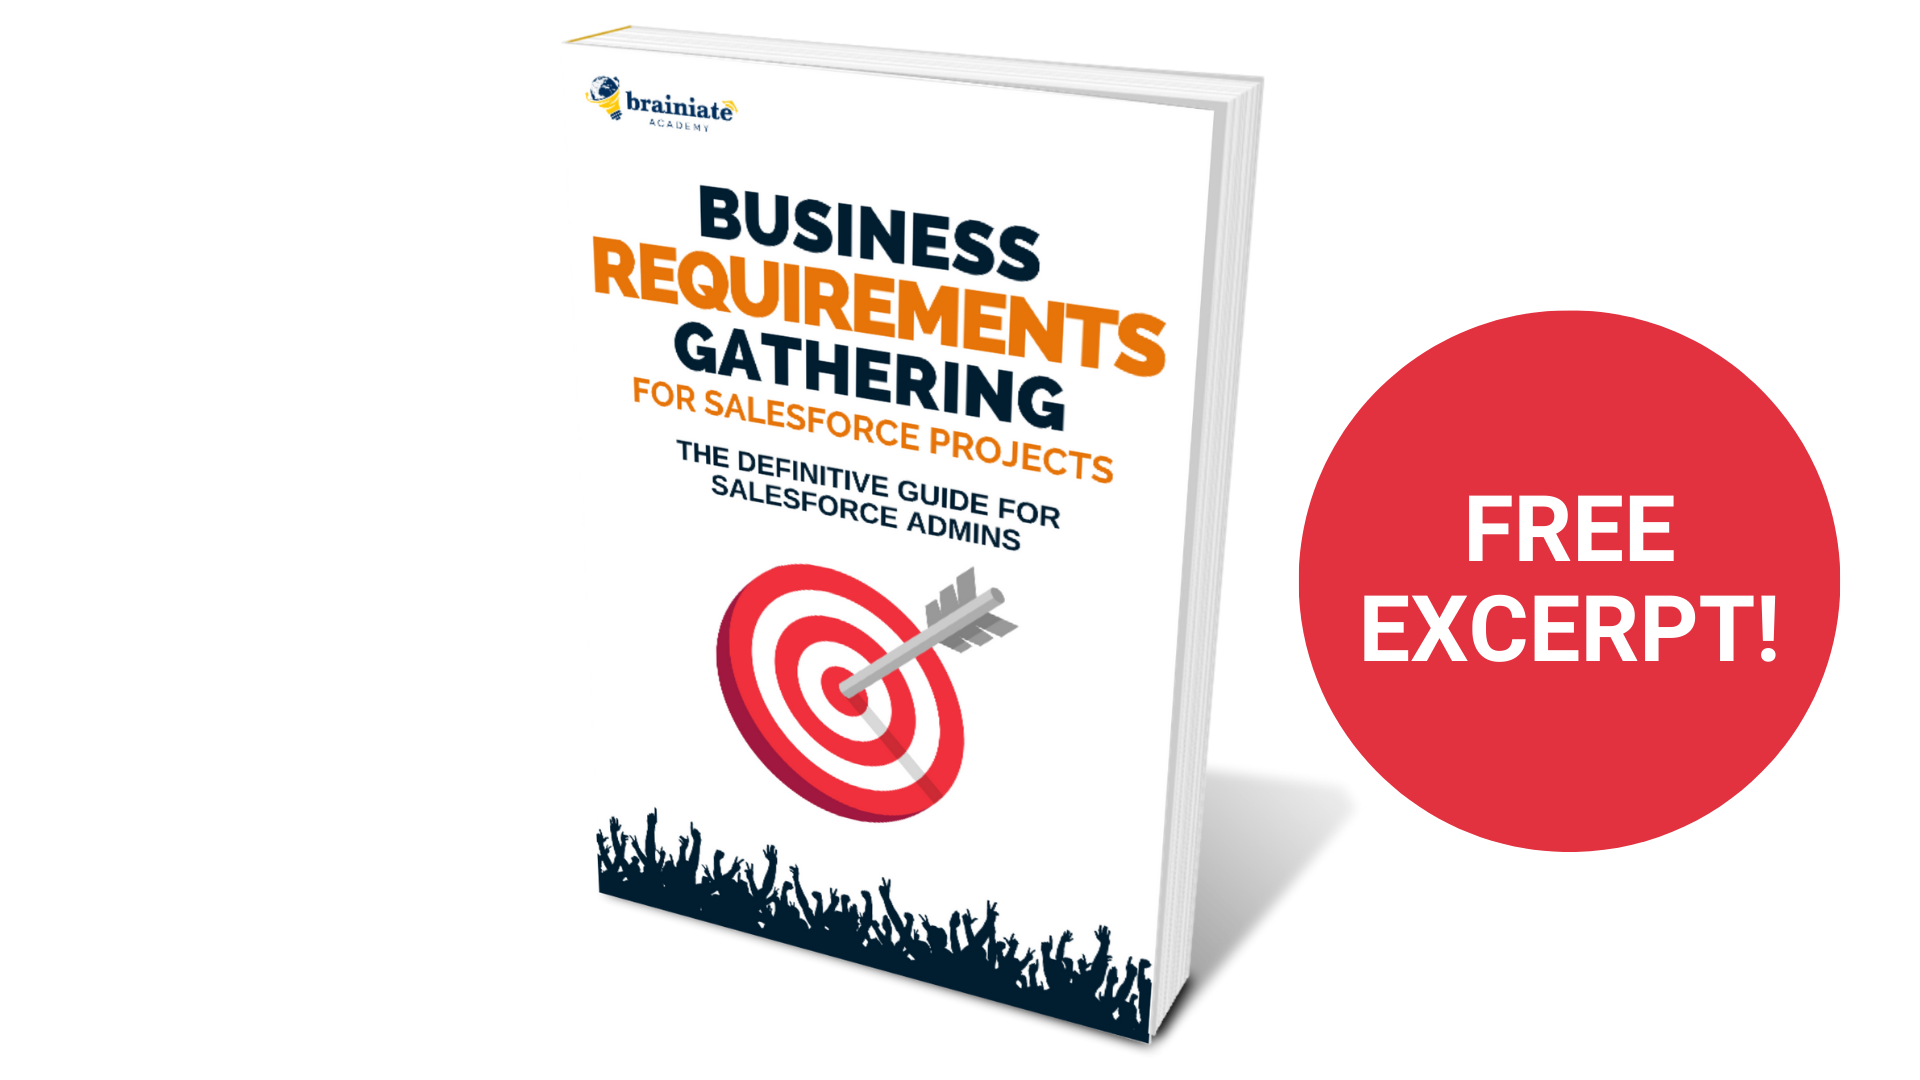 Business Requirement Gathering For Salesforce projects  